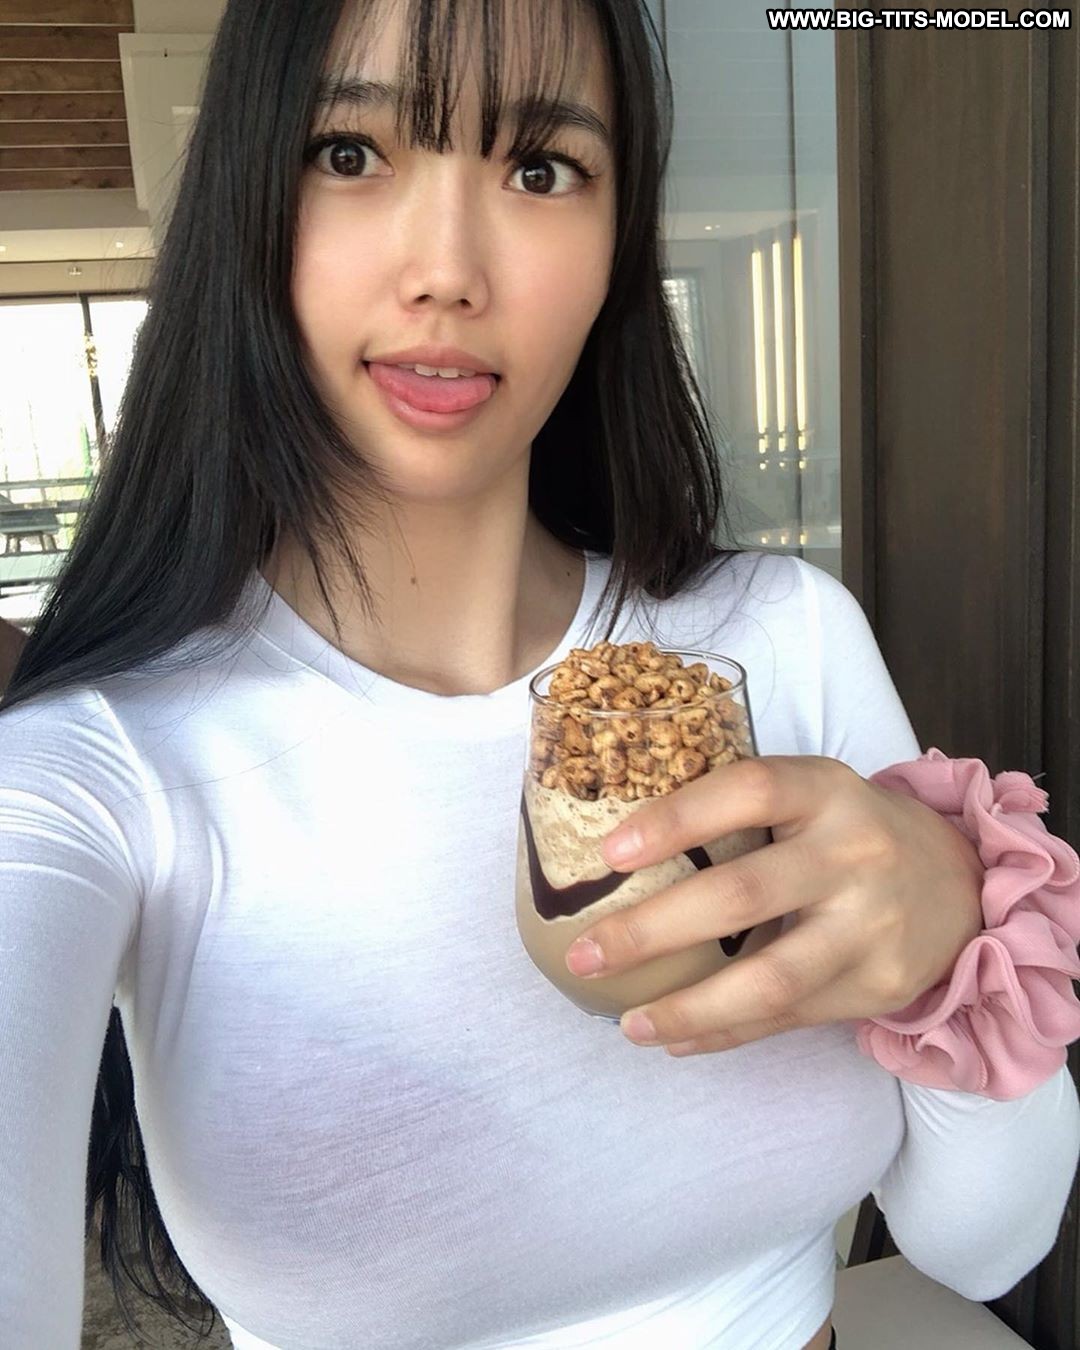 Ssunbiki Model Boobs Girl Asian Twitch Girl Busty Naked Naked Boobs Big Tits Influencers